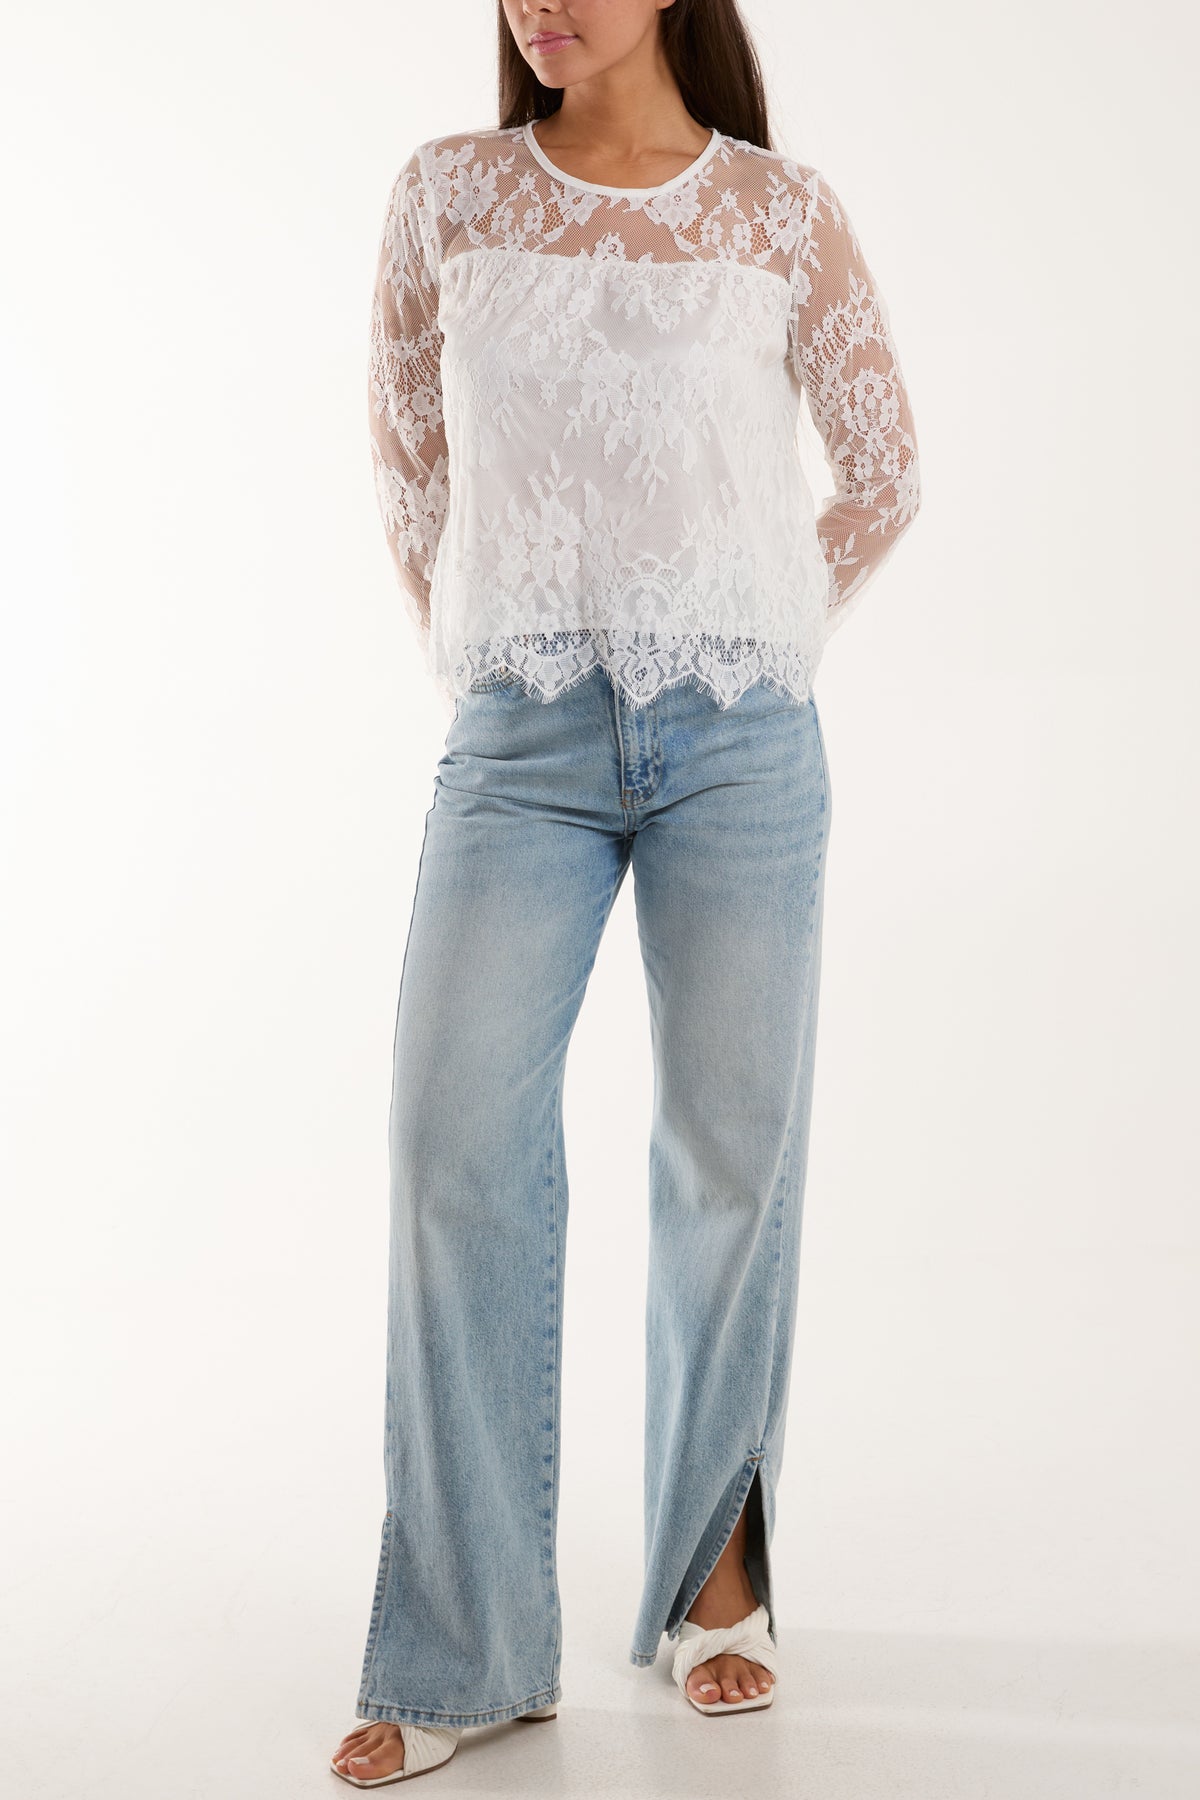 Lace Long Sleeve Top w/ Lining